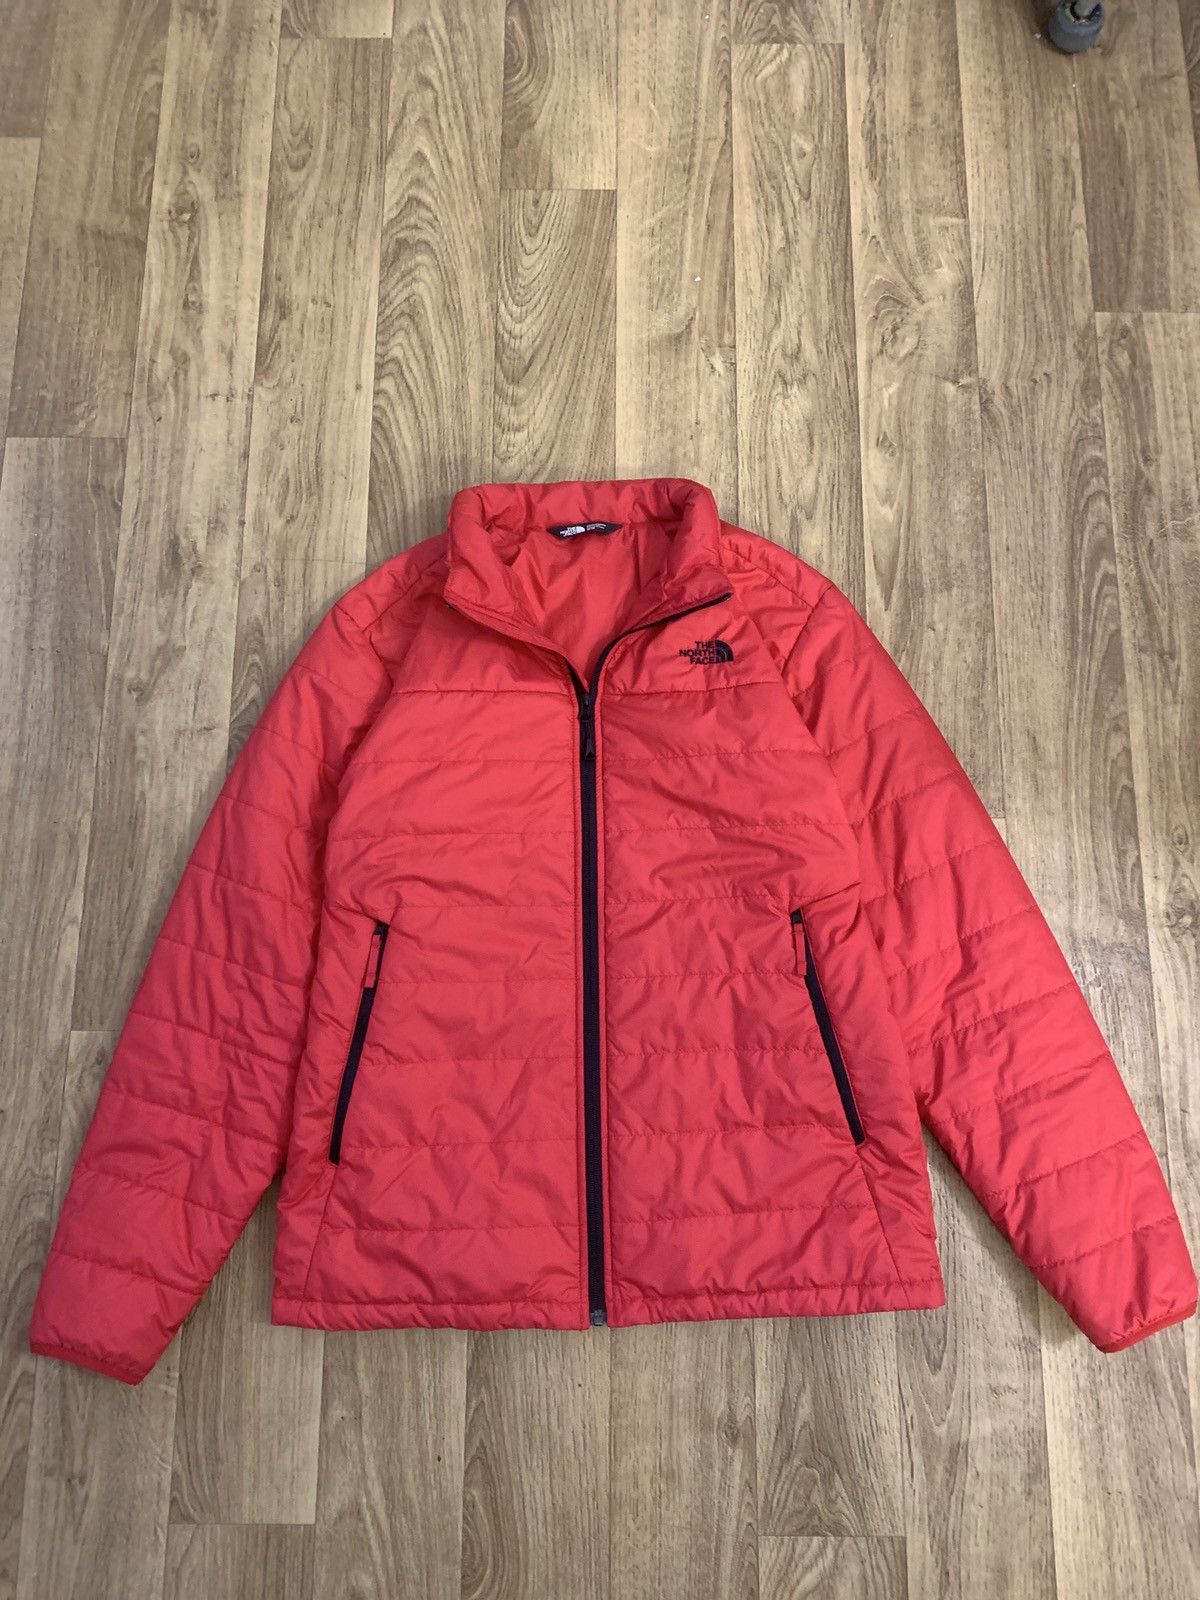 Vintage The North Face Zip Up Light Puffer Jacket Red | Grailed